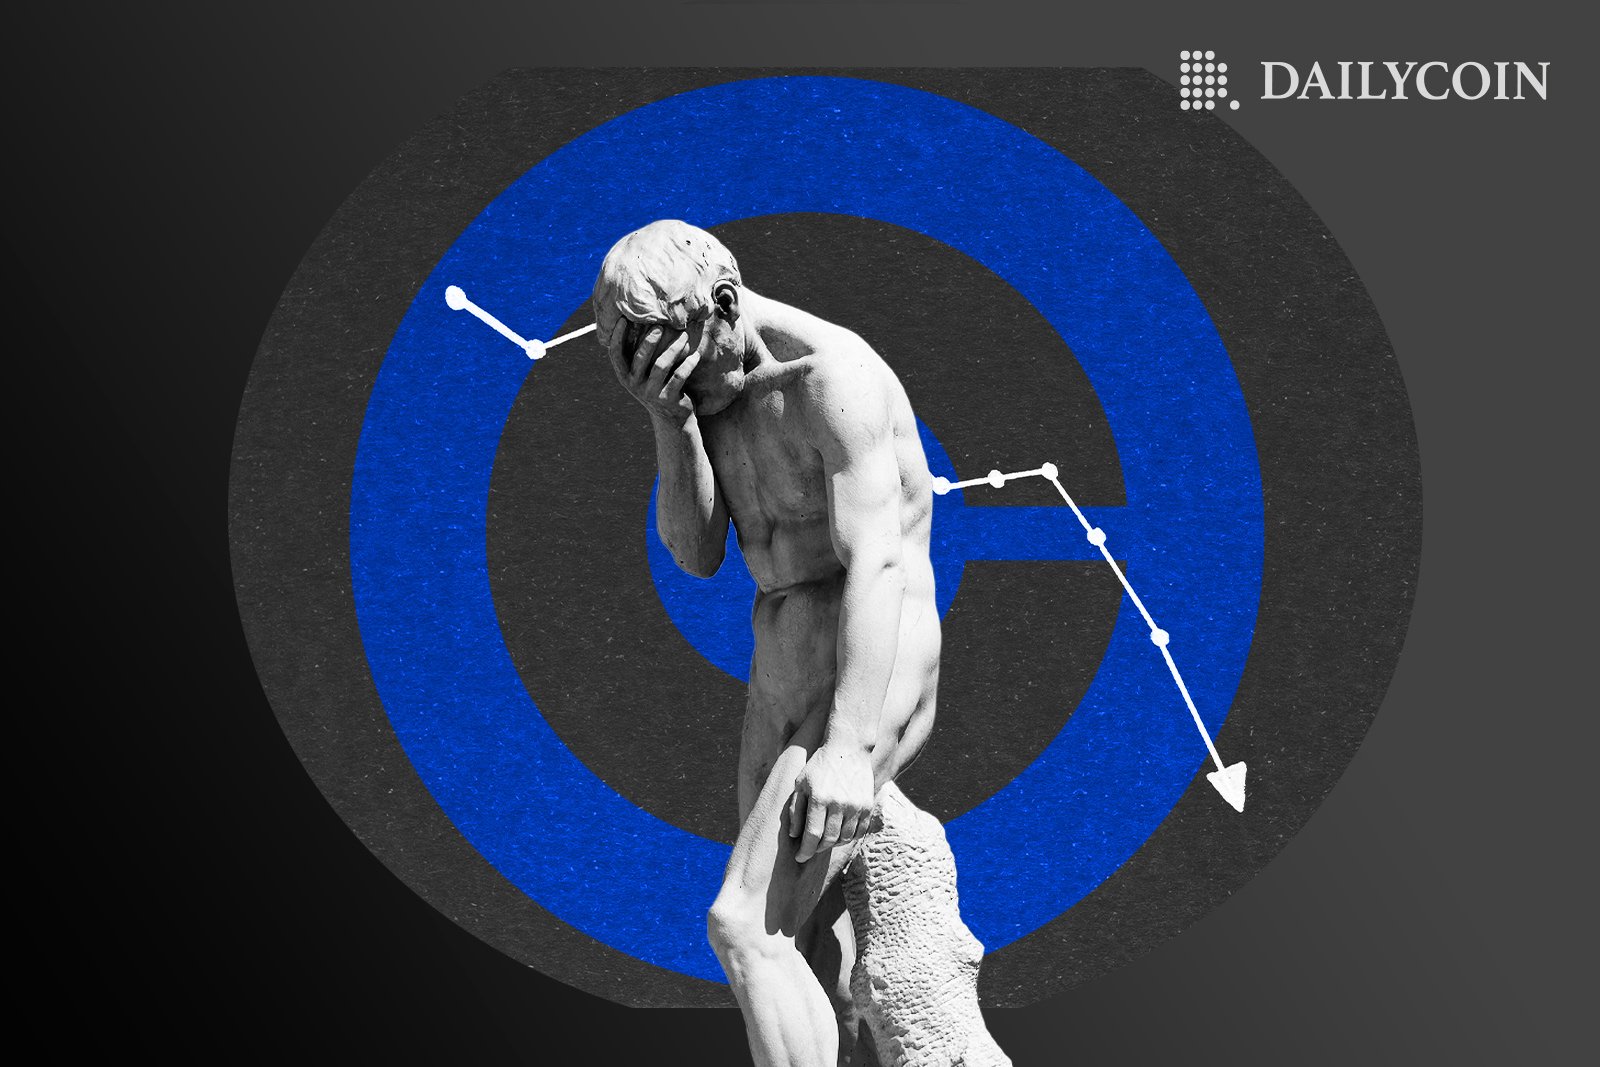 Statue of a sad man in front of Coinbase logo with a graph going down.